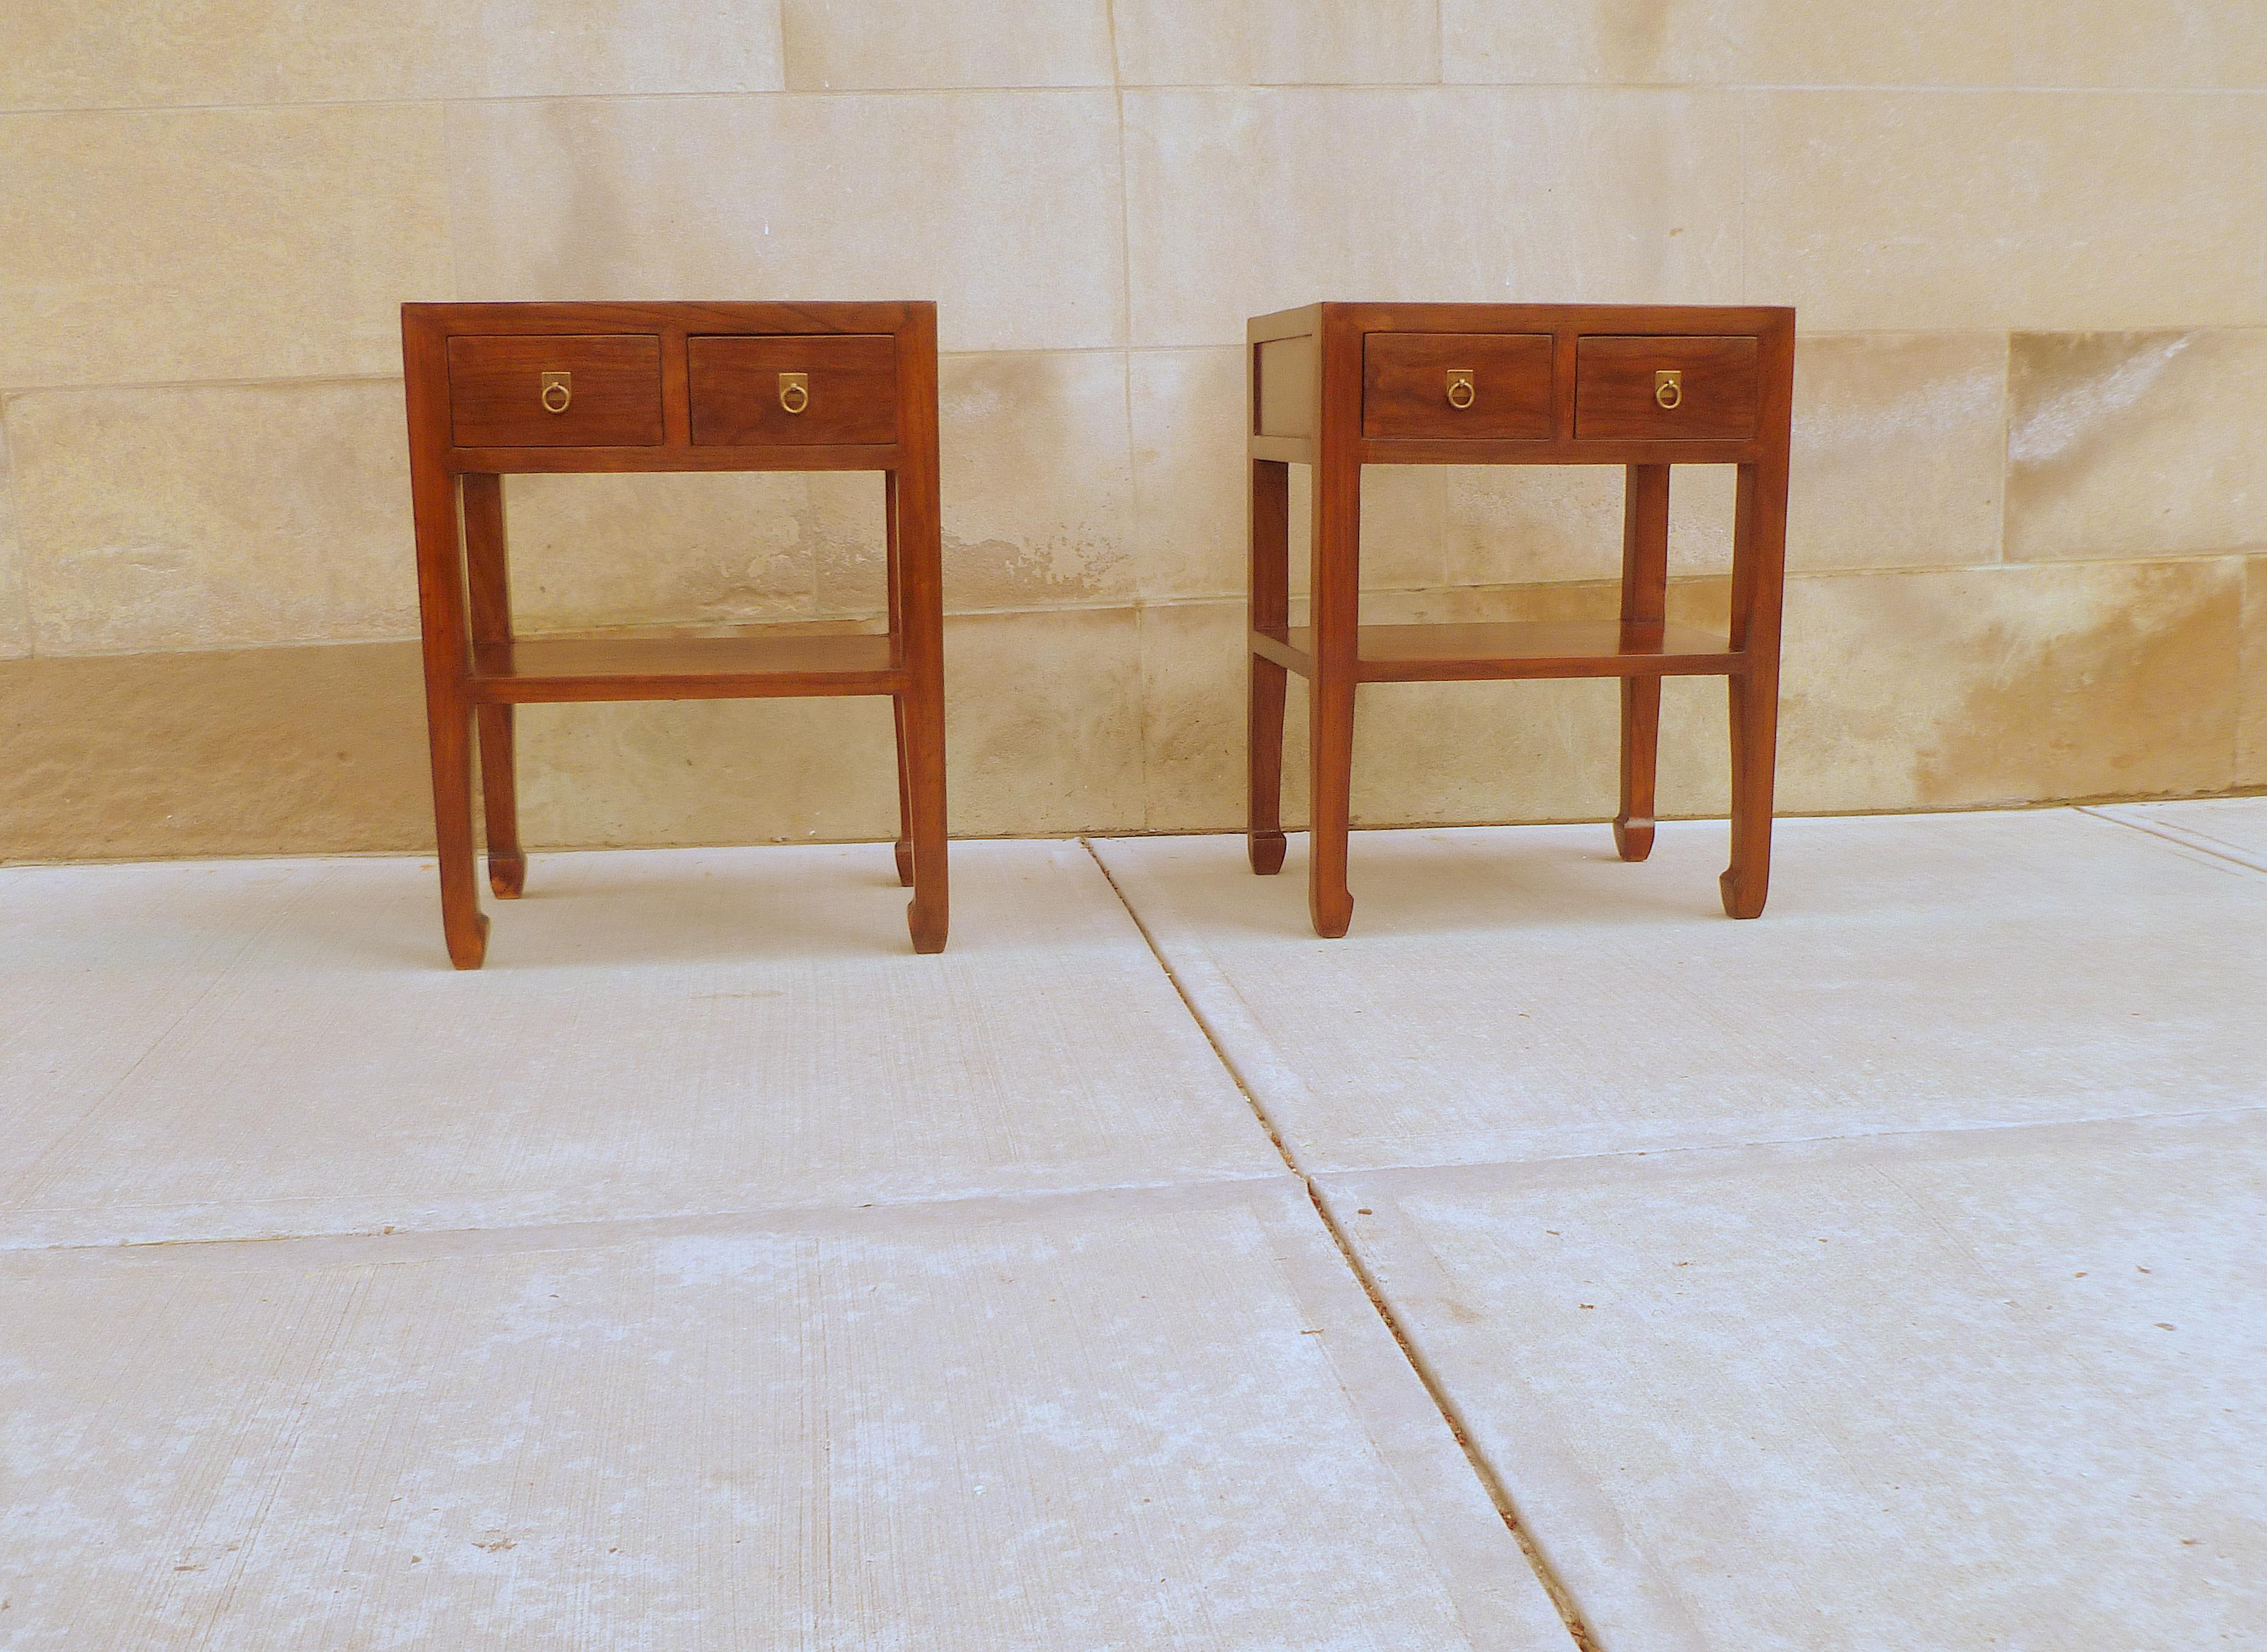 Polished Pair of Fine Jumu End Tables with Drawers